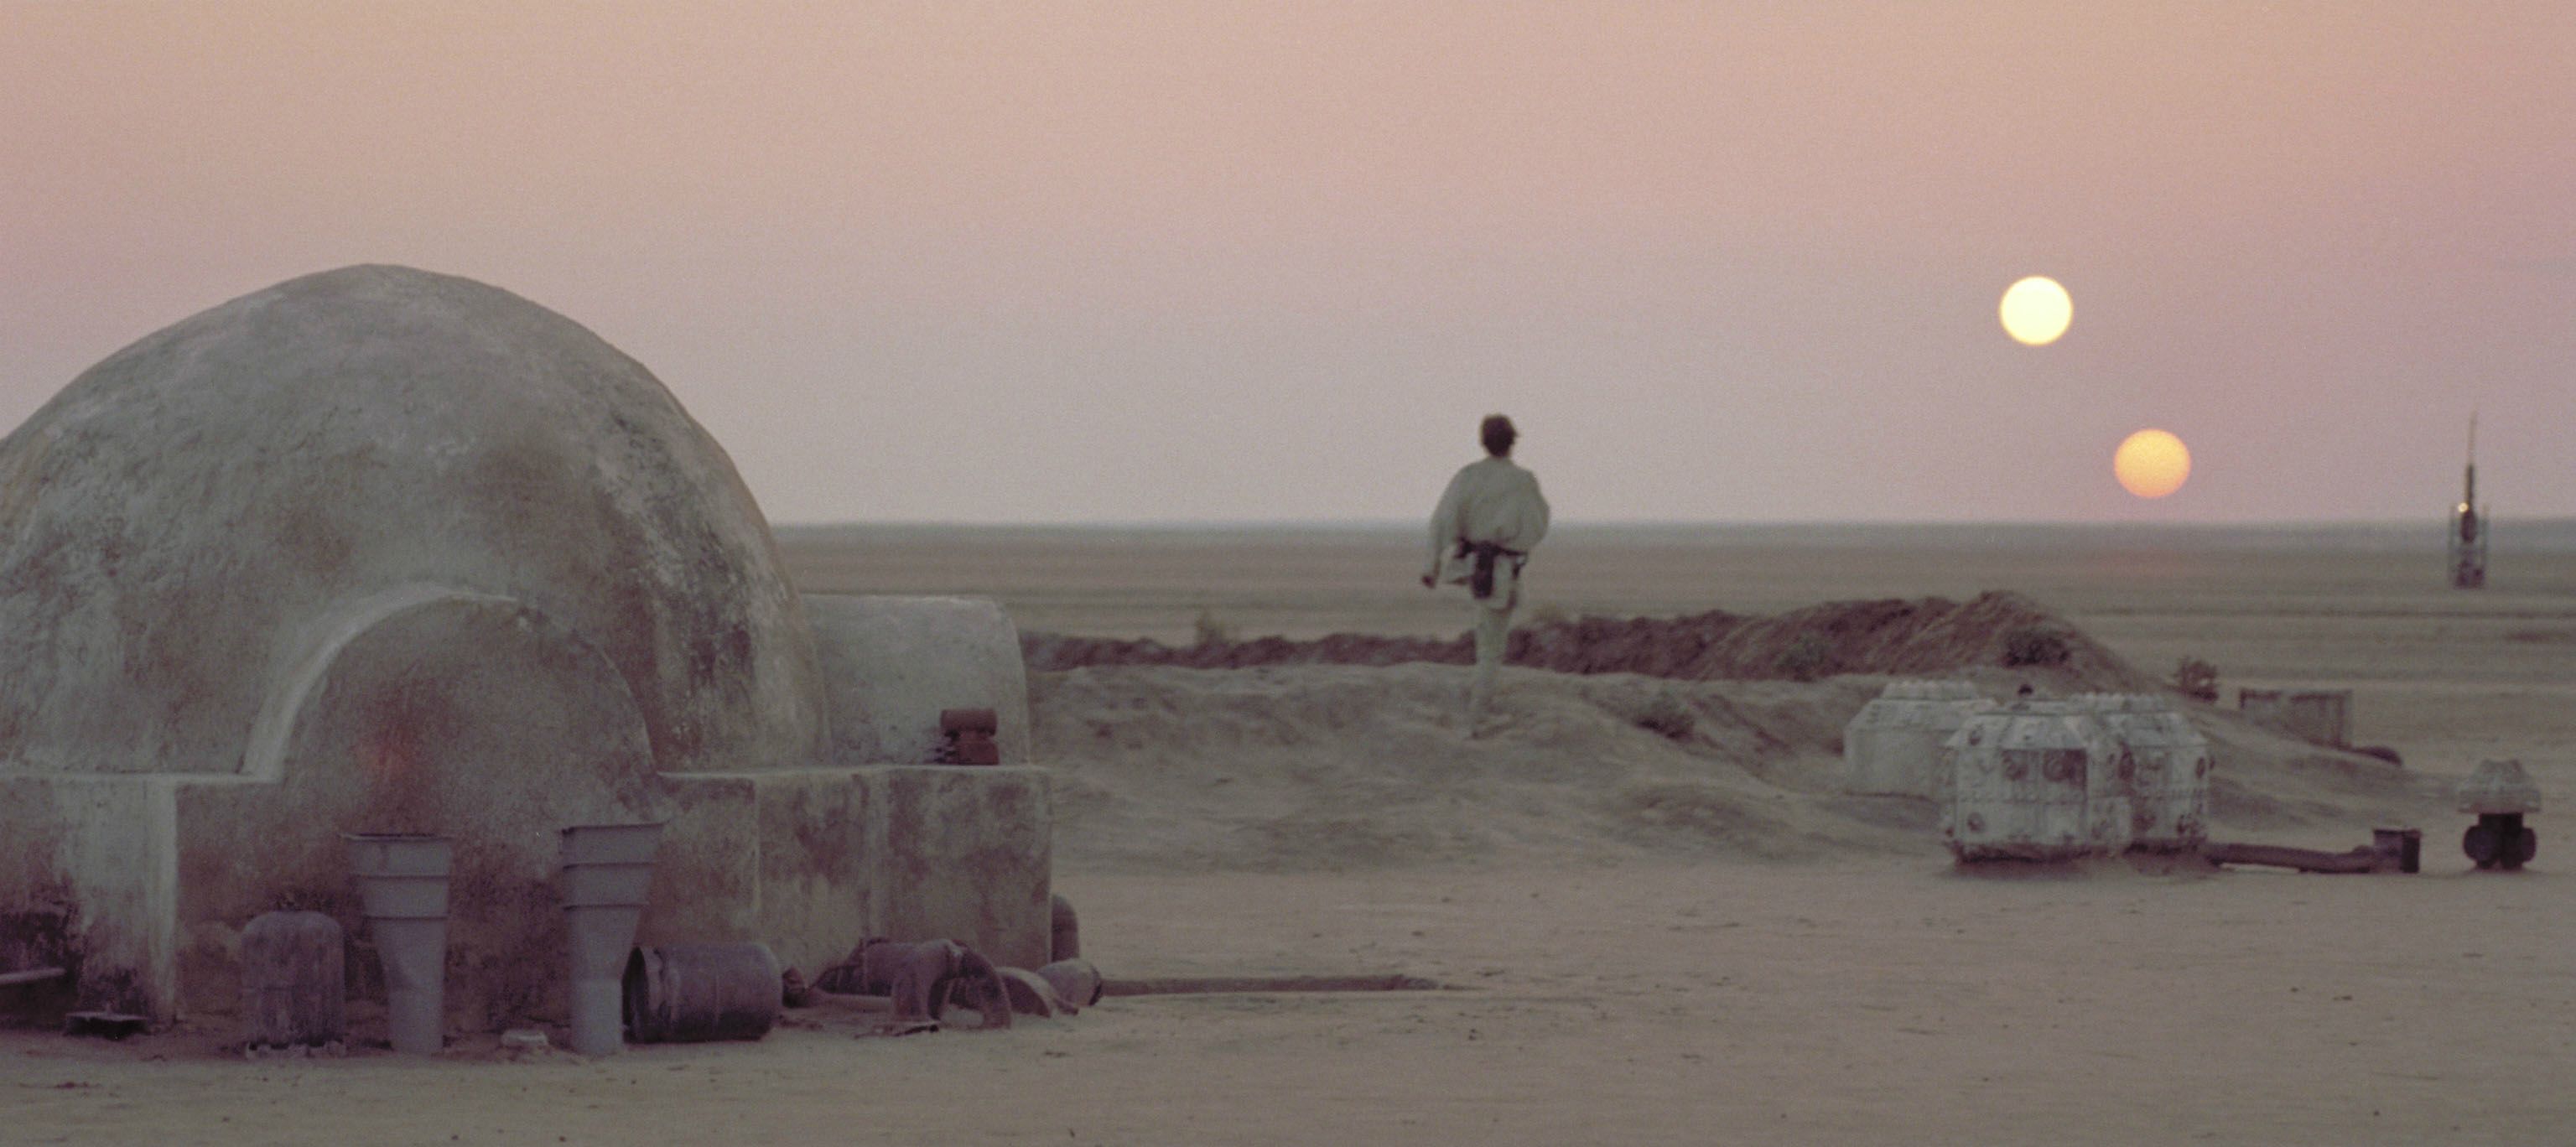 Request: Does anyone have a HD desktop wallpaper of the binary sunset from Episode IV?